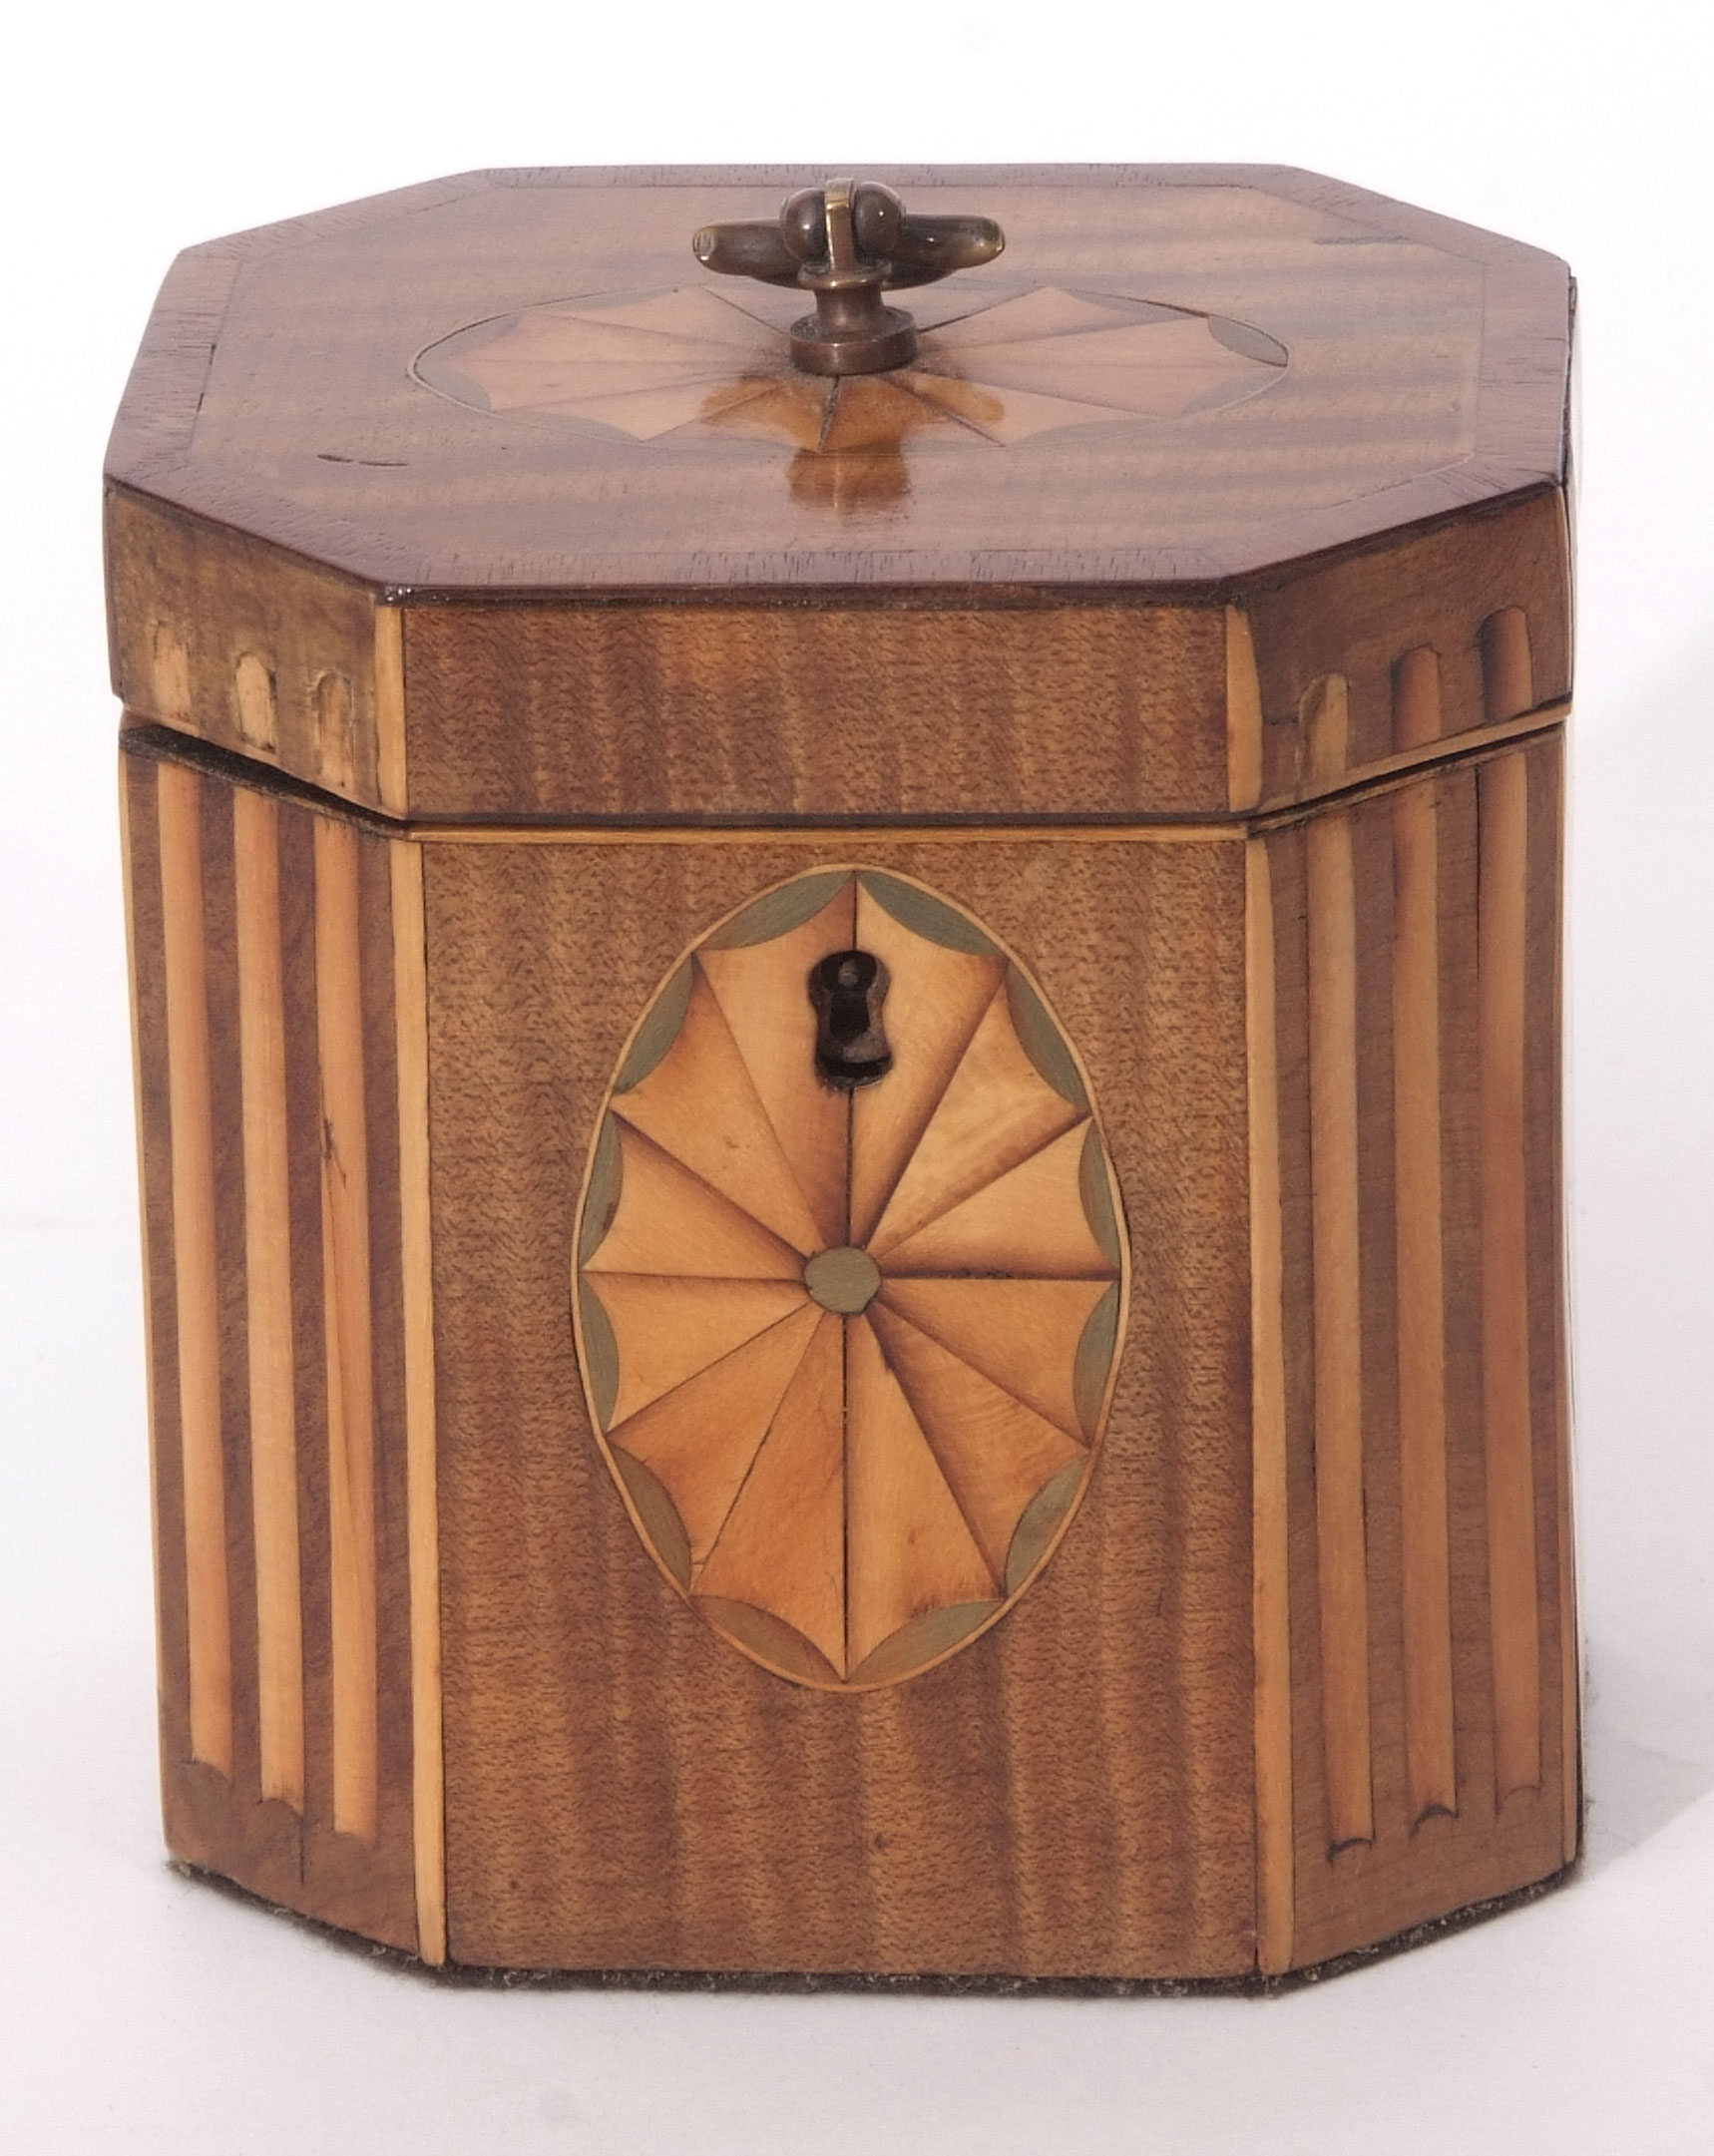 Sheraton style mahogany small tea caddy of octagonal form, inlaid with typical roundels, void